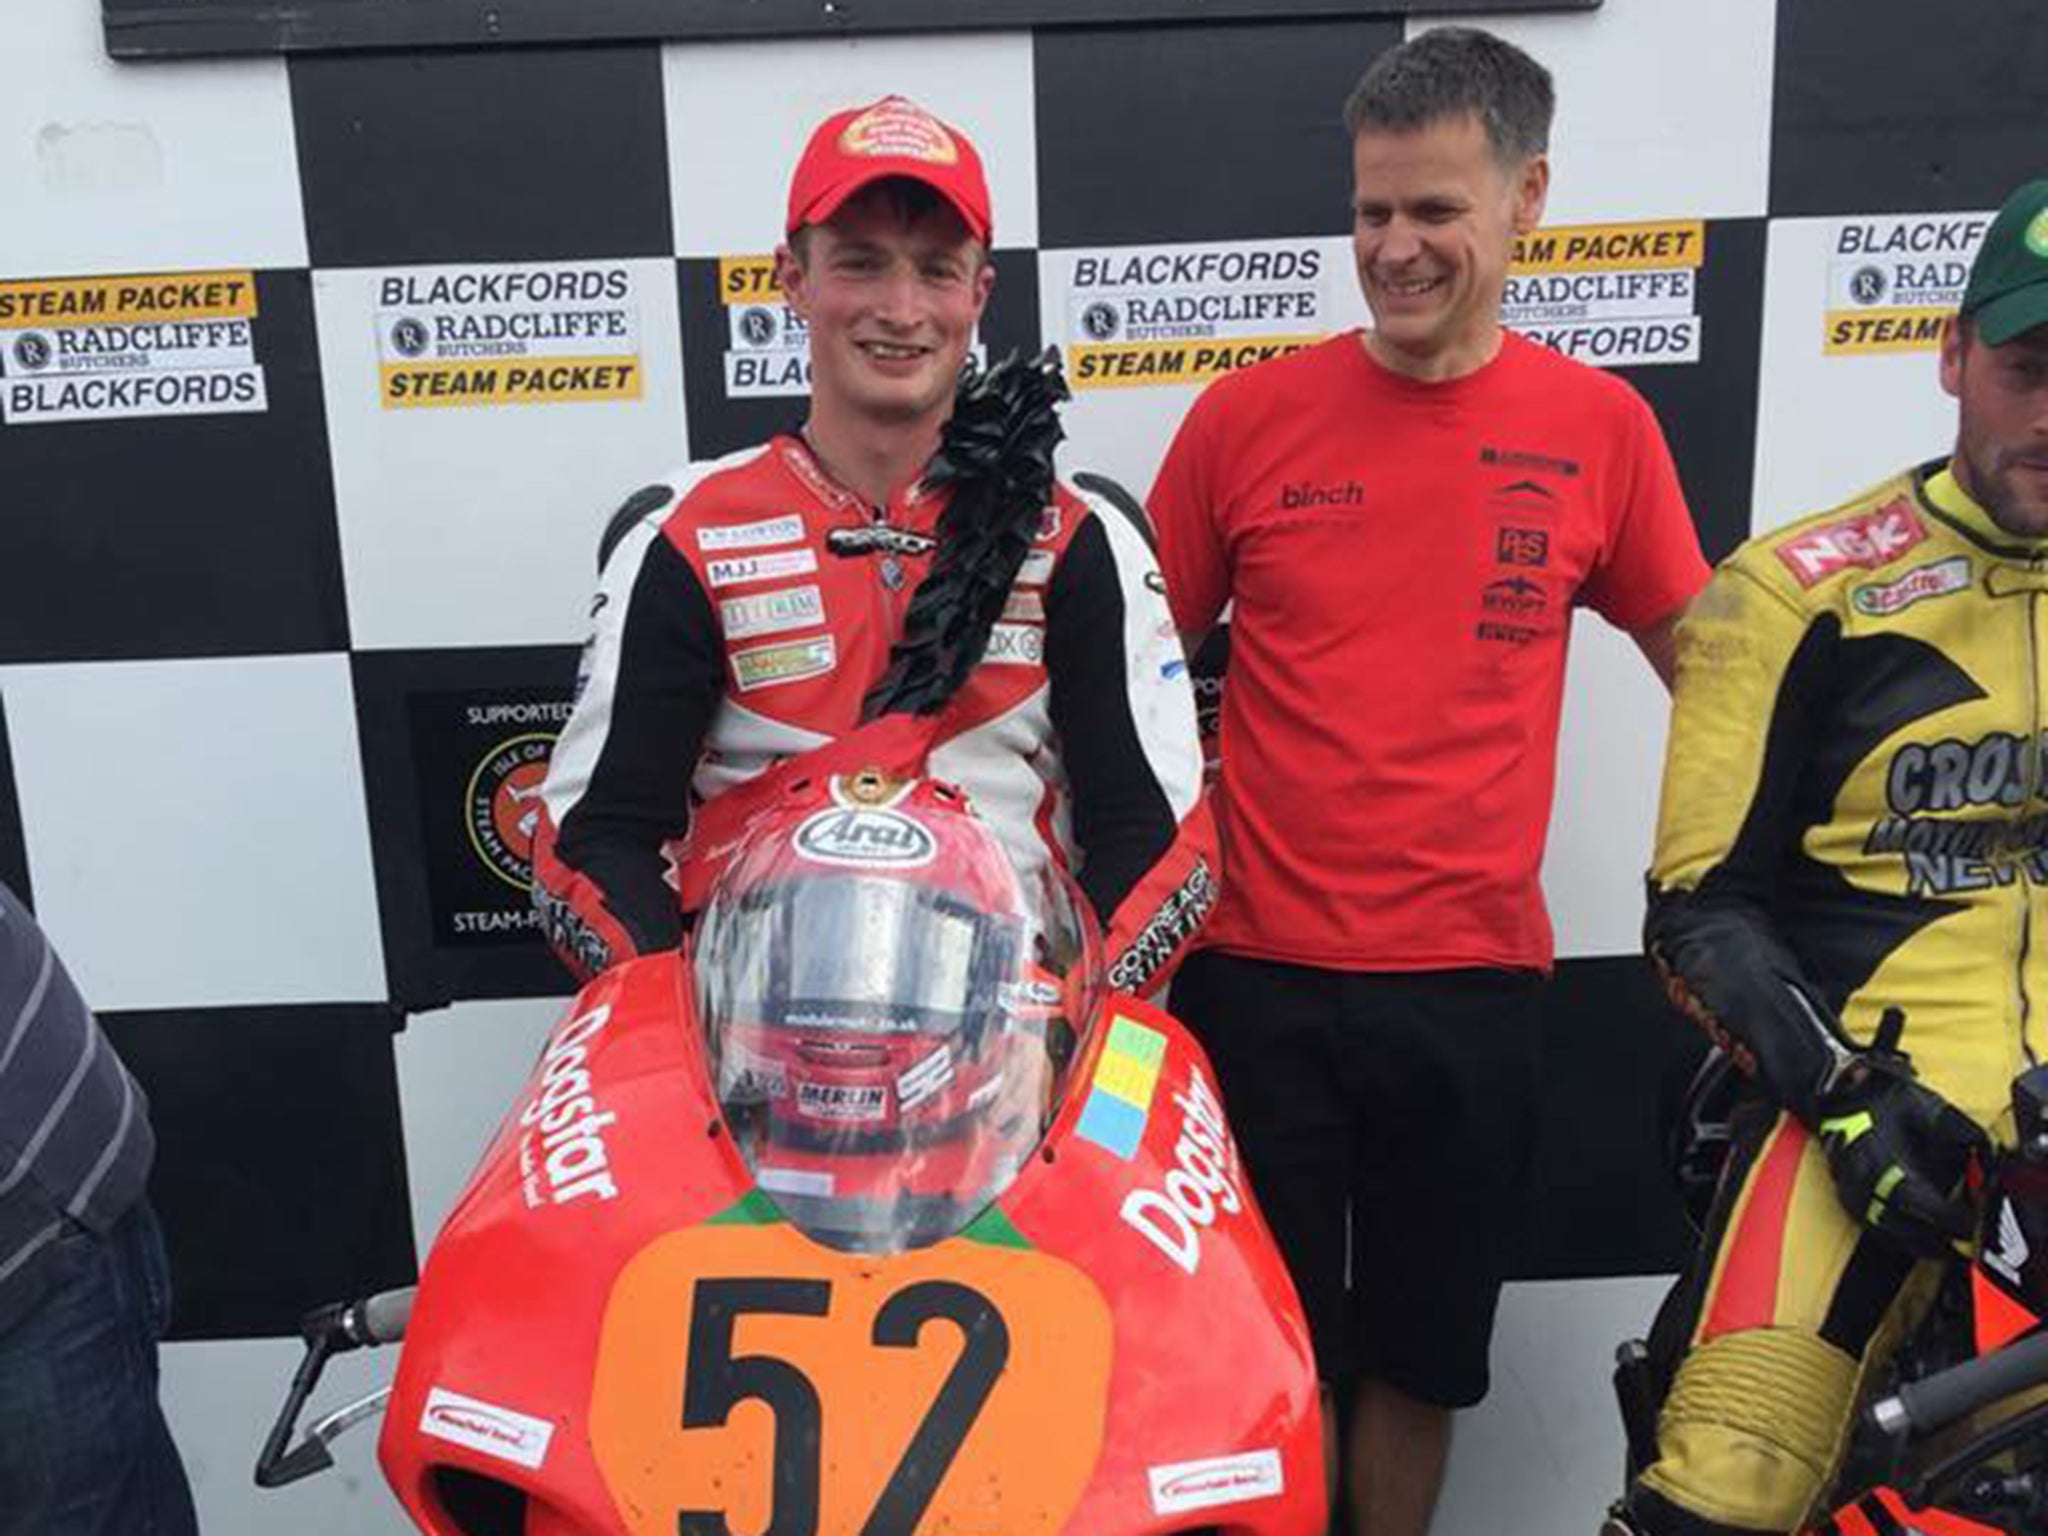 Cowton was a three-time winner at the Southern 100 and also won the Ulster GP and NW 200